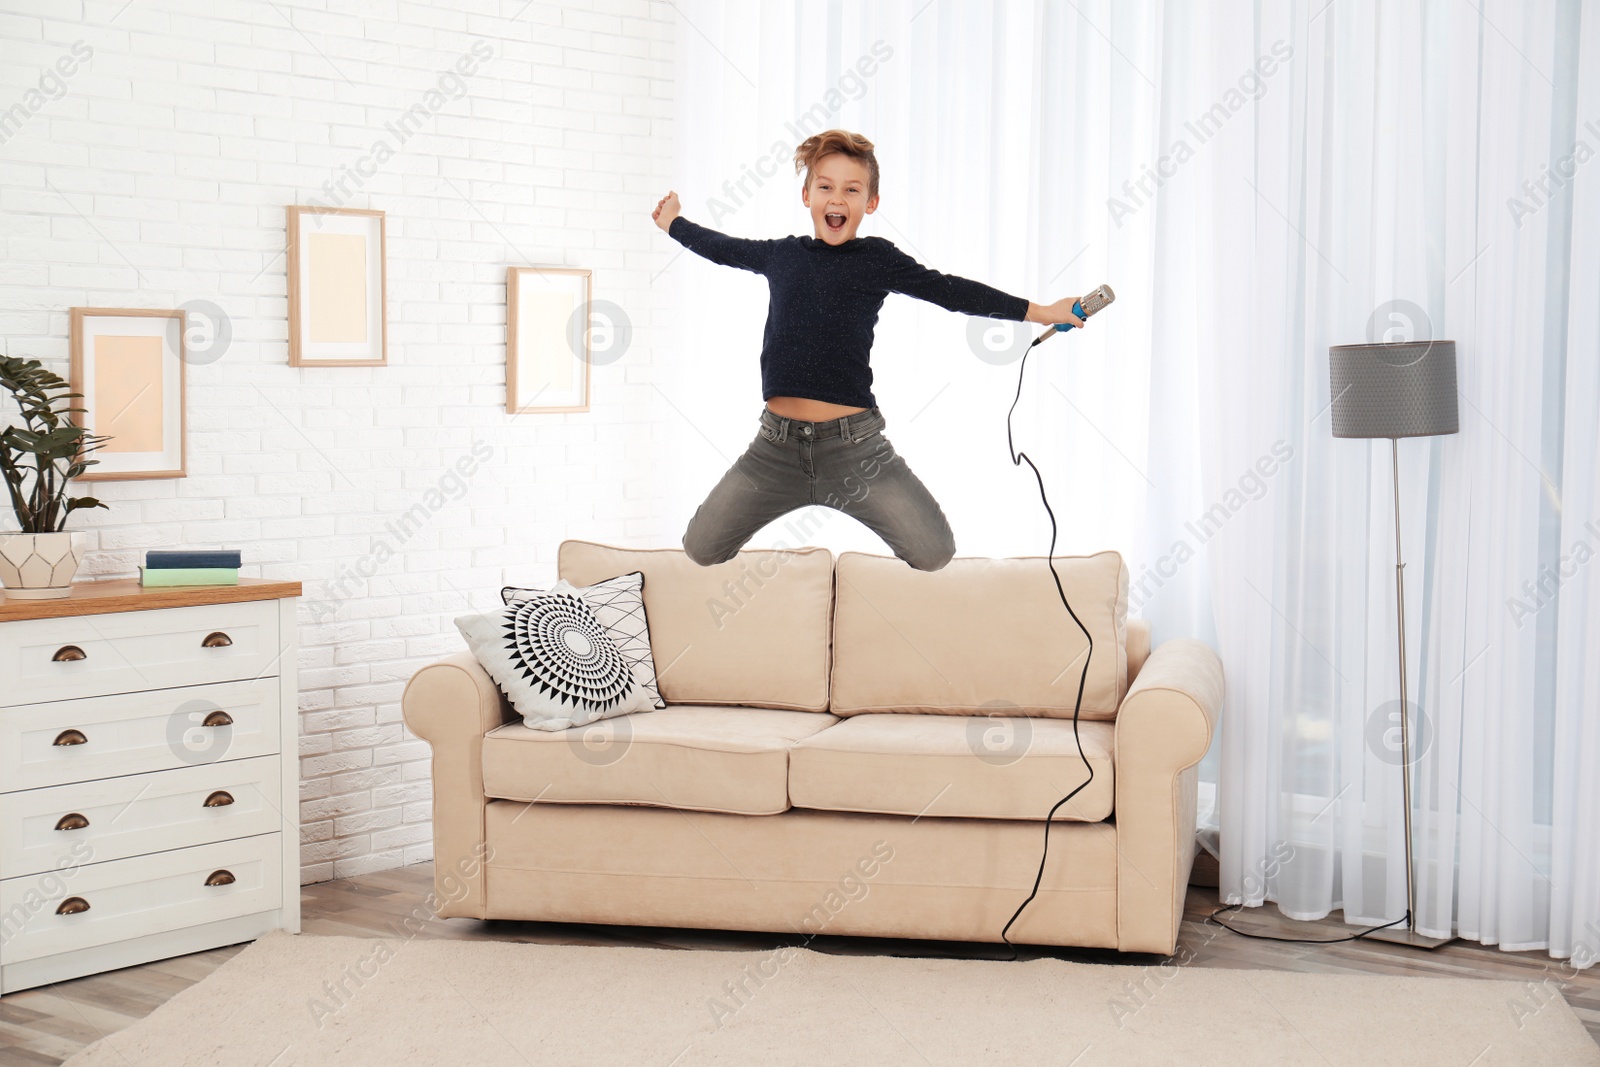 Photo of Cute boy with microphone jumping on sofa in living room